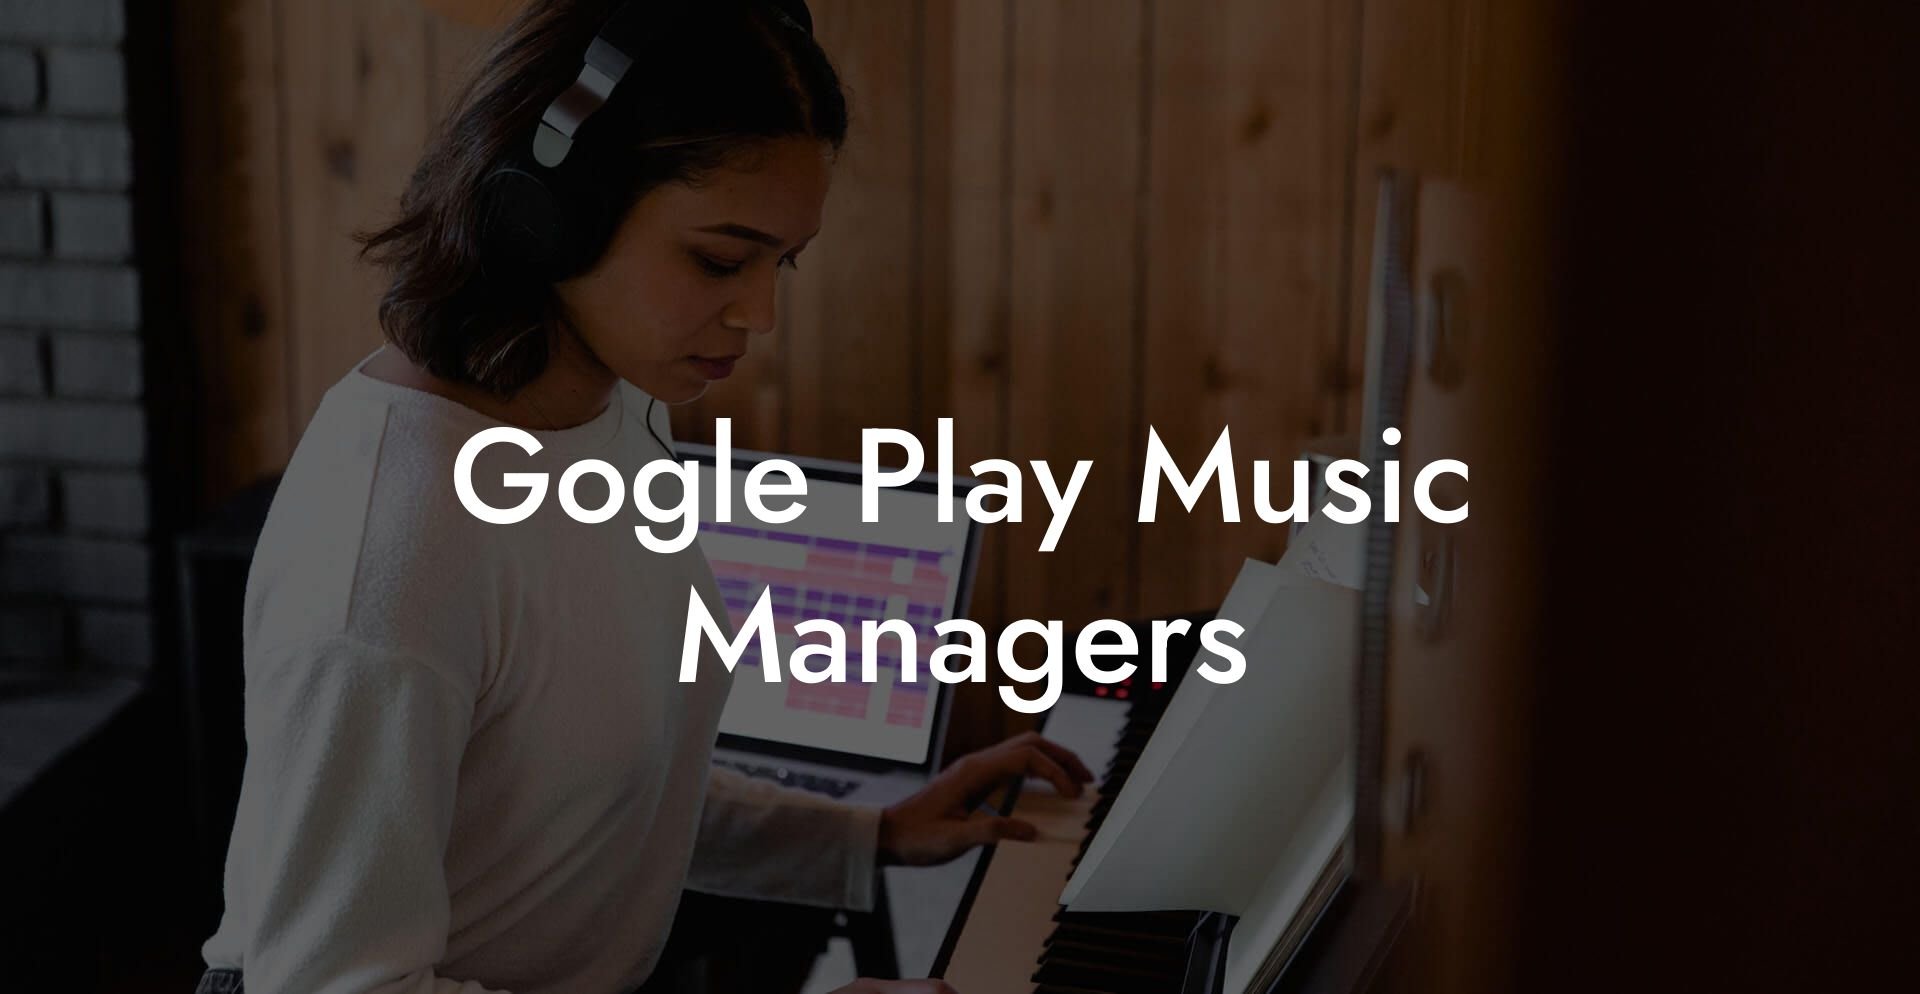 Gogle Play Music Managers